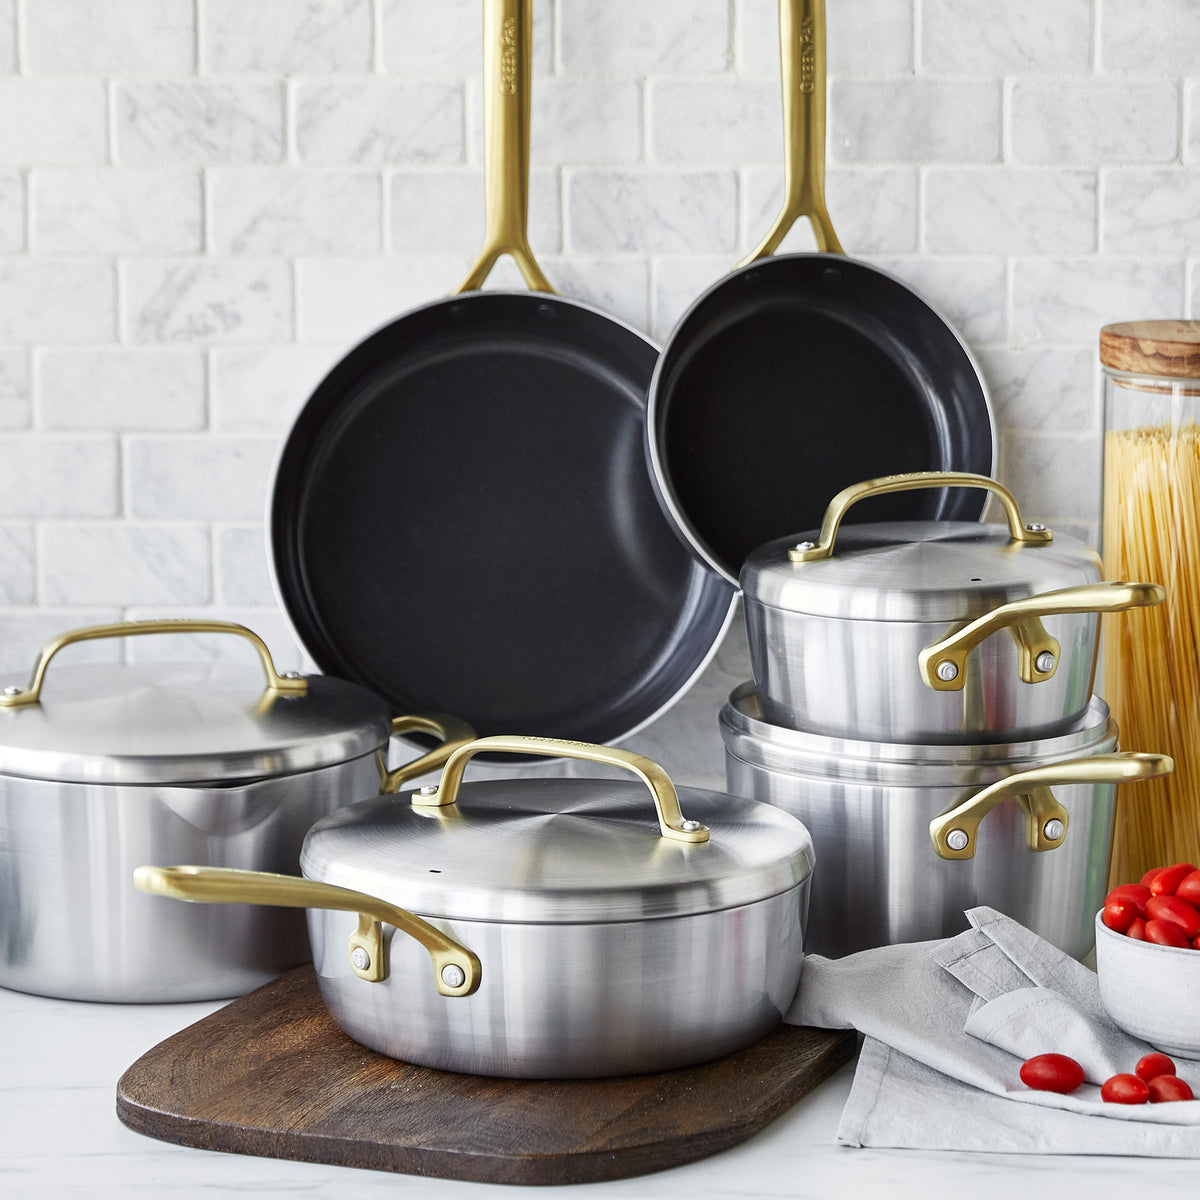 All-Clad Enameled Cast Iron 10-Piece Cookware Set